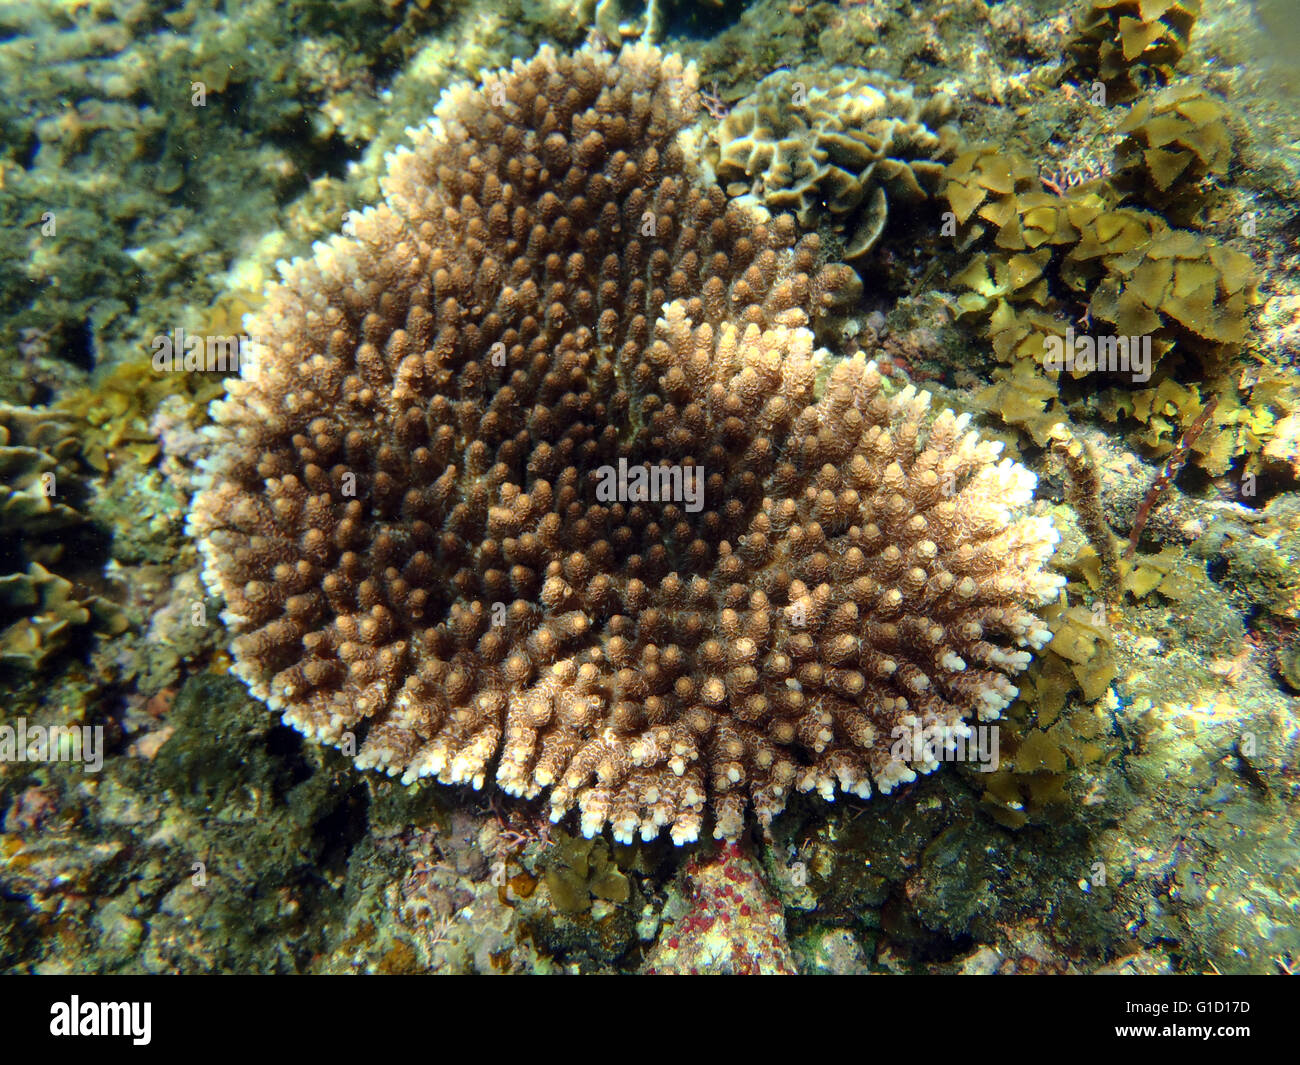 exotic marine life with corals and fishes Stock Photo - Alamy